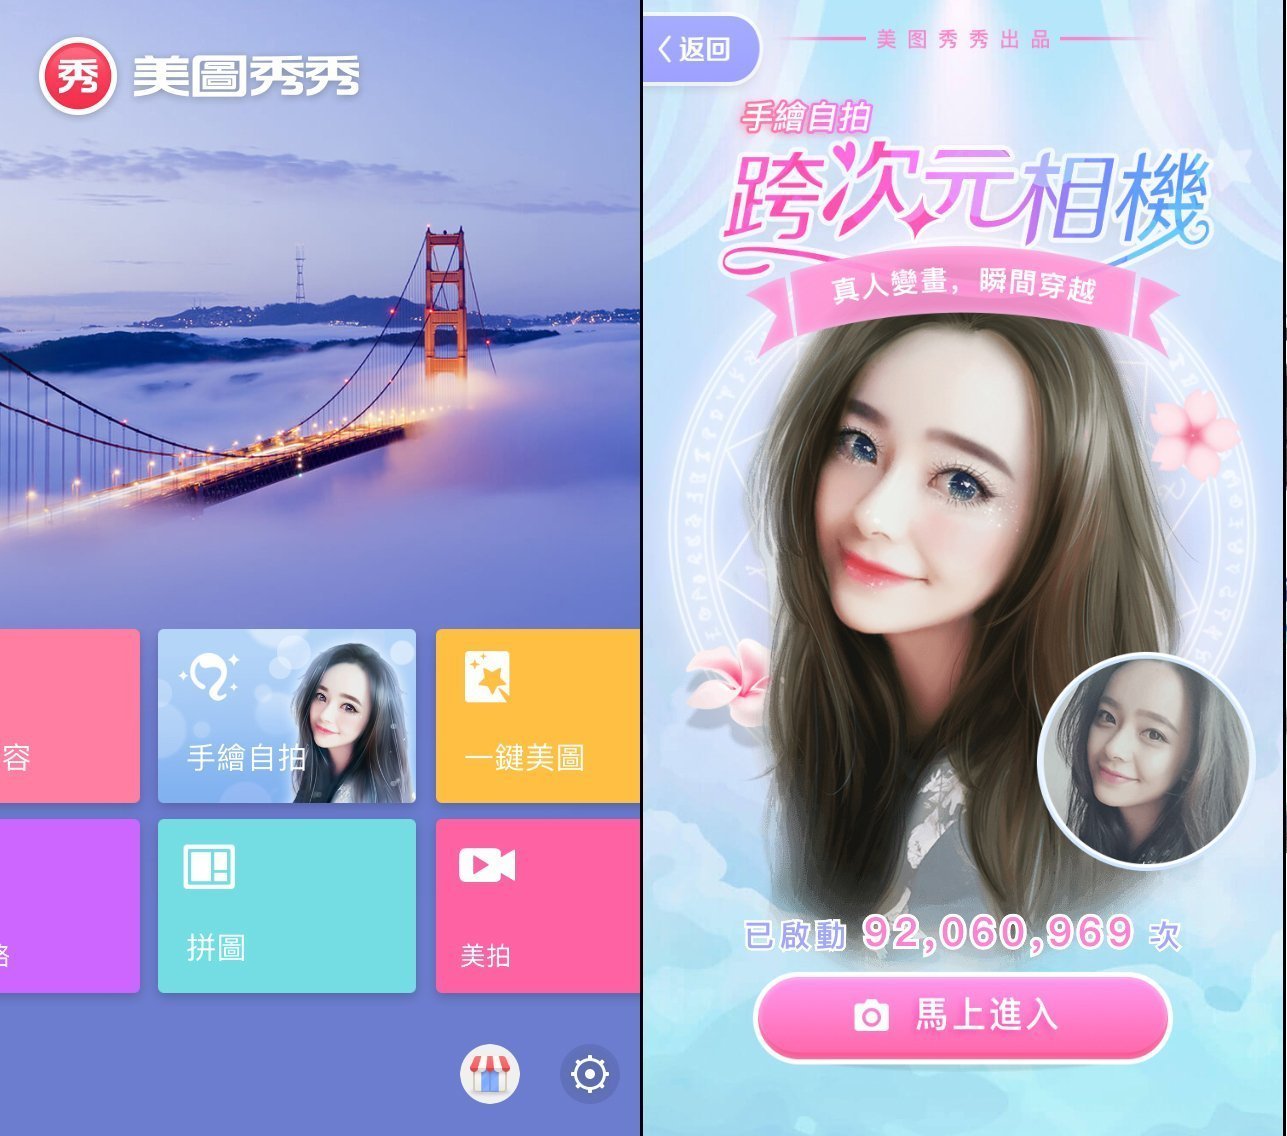 meitu new feature hands on 01